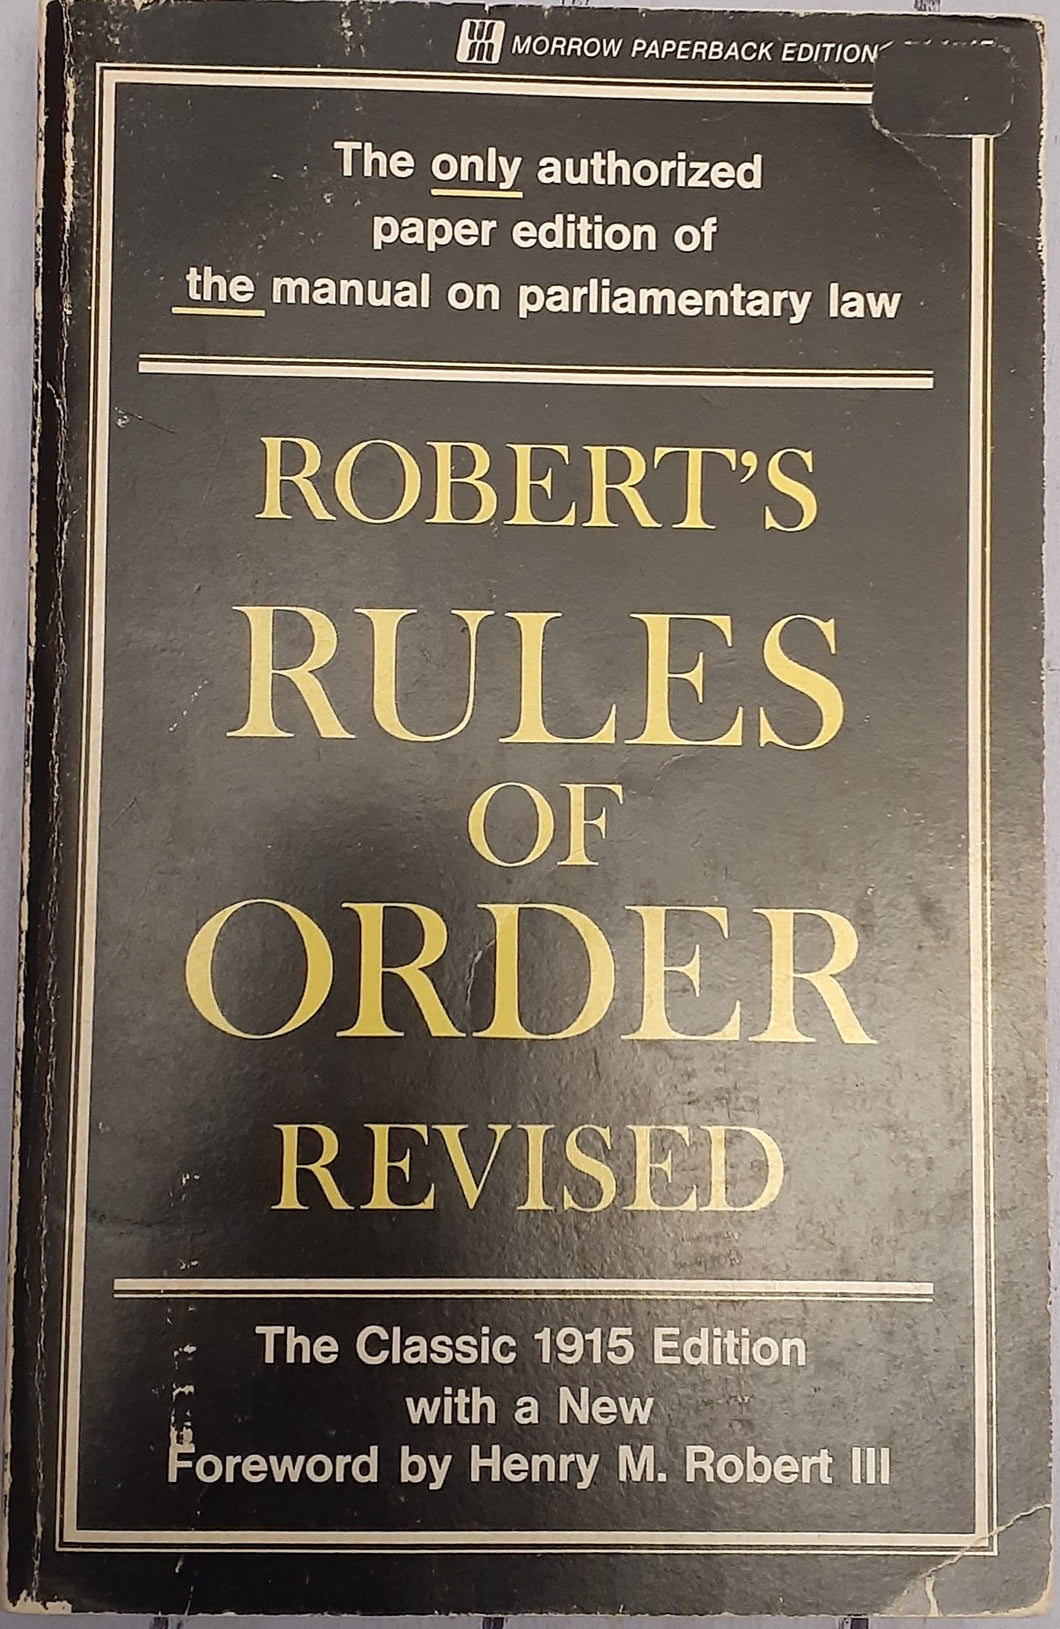 Robert's Rules of Order Revised